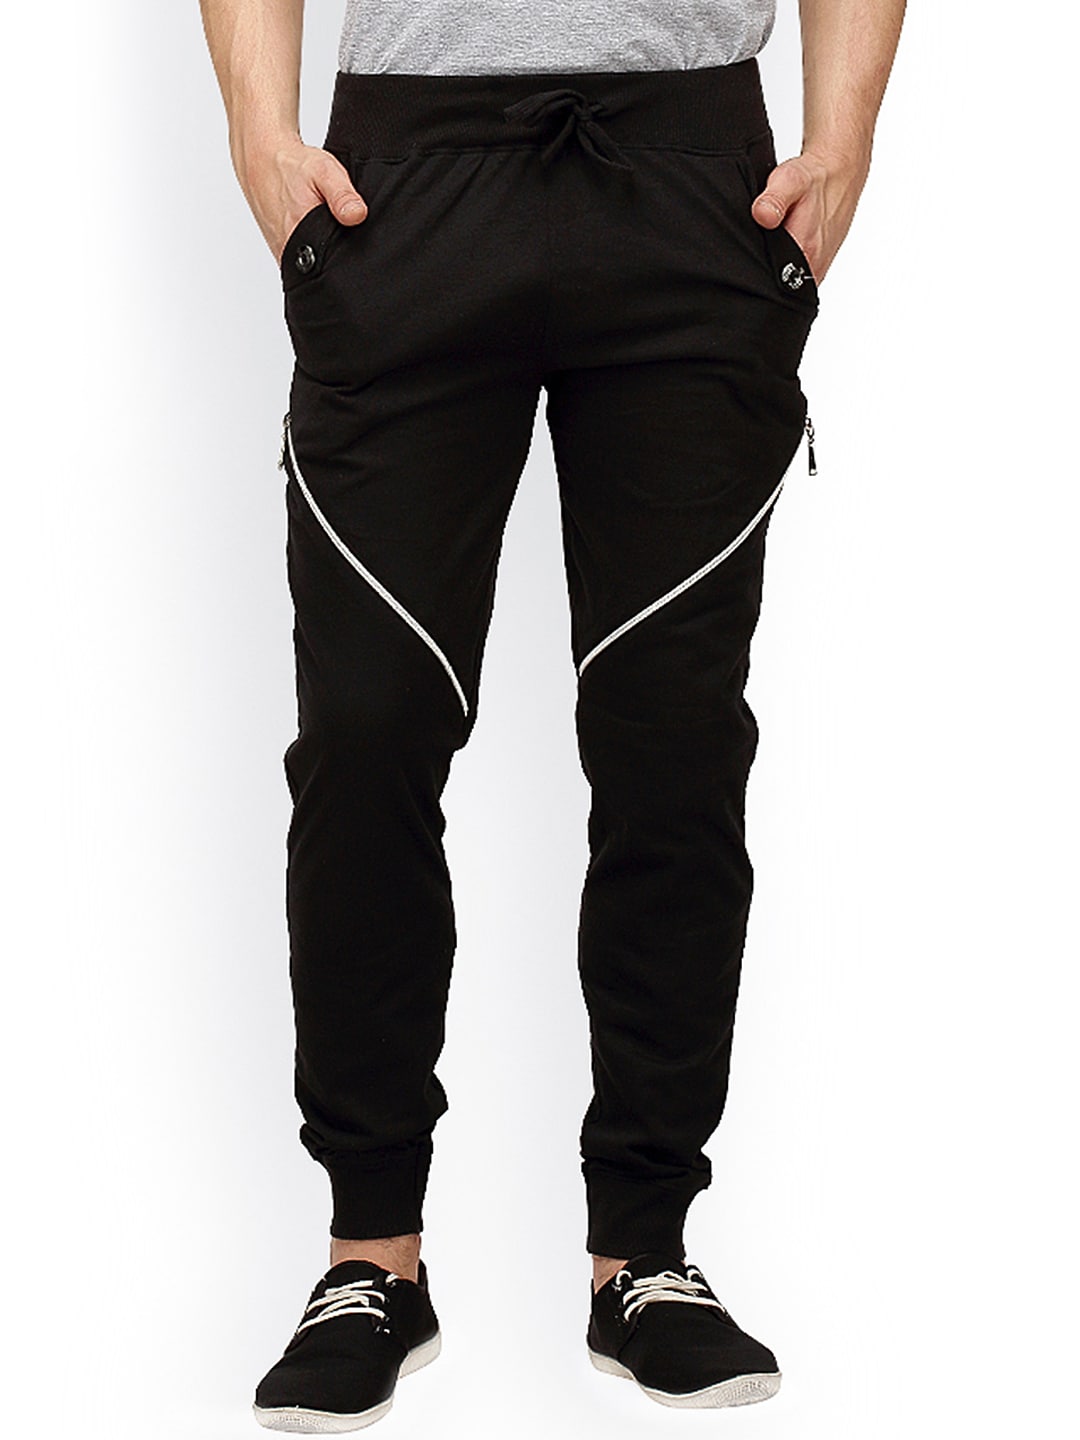 track pants online shopping